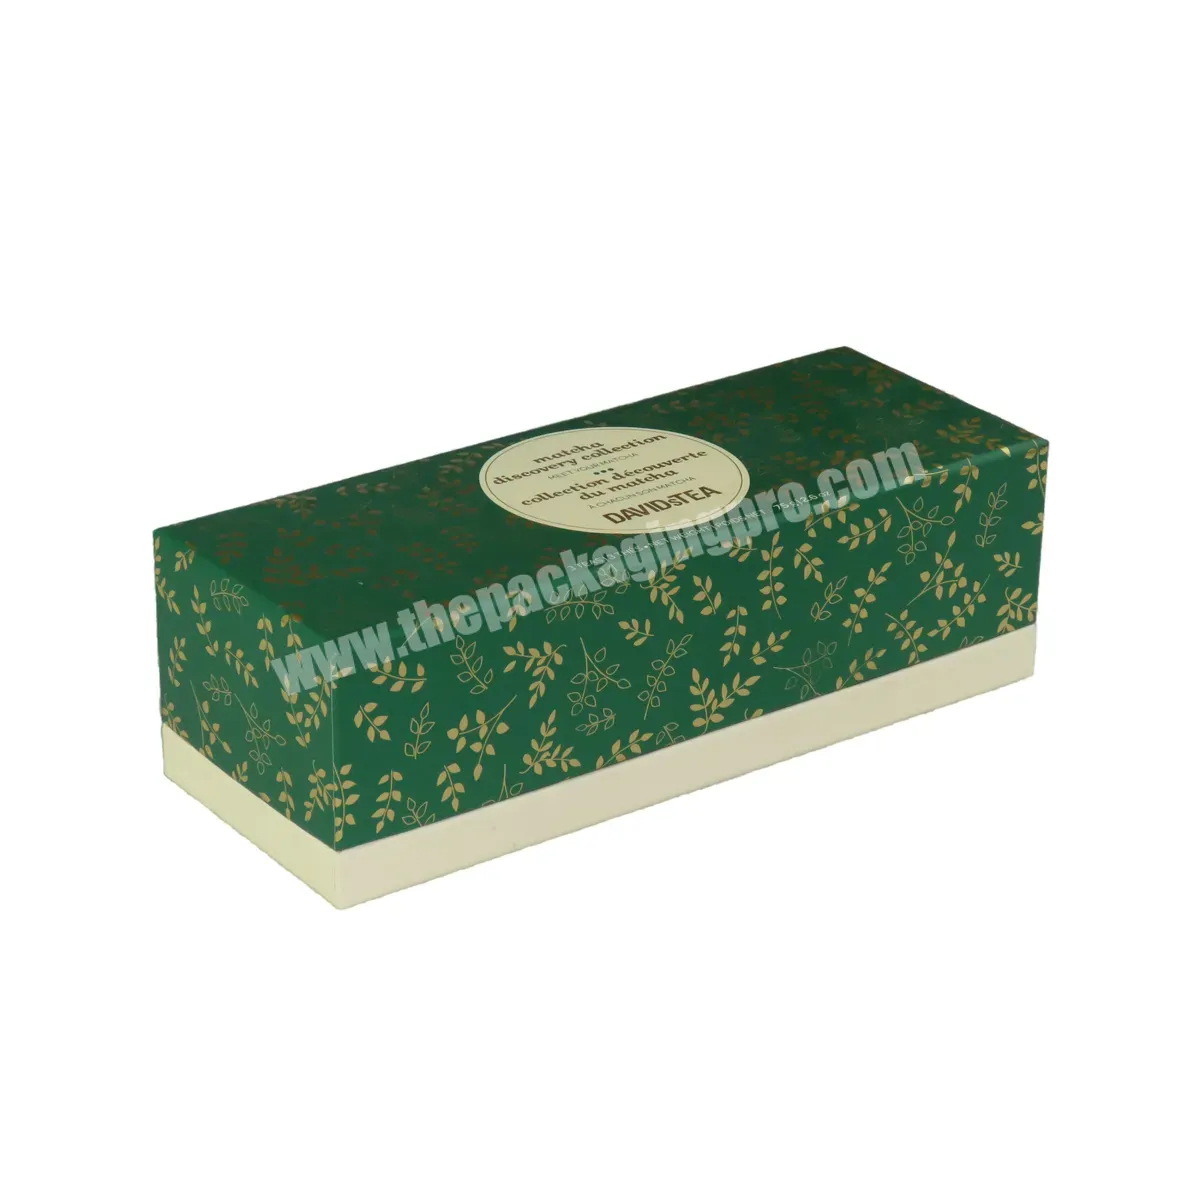 Elegant And Sustainable Premium Luxury Tea Packaging Boxes Solutions For Your Business Needs - Buy Elegant And Sustainable,Luxury Tea Packaging Boxes,Business Needs.